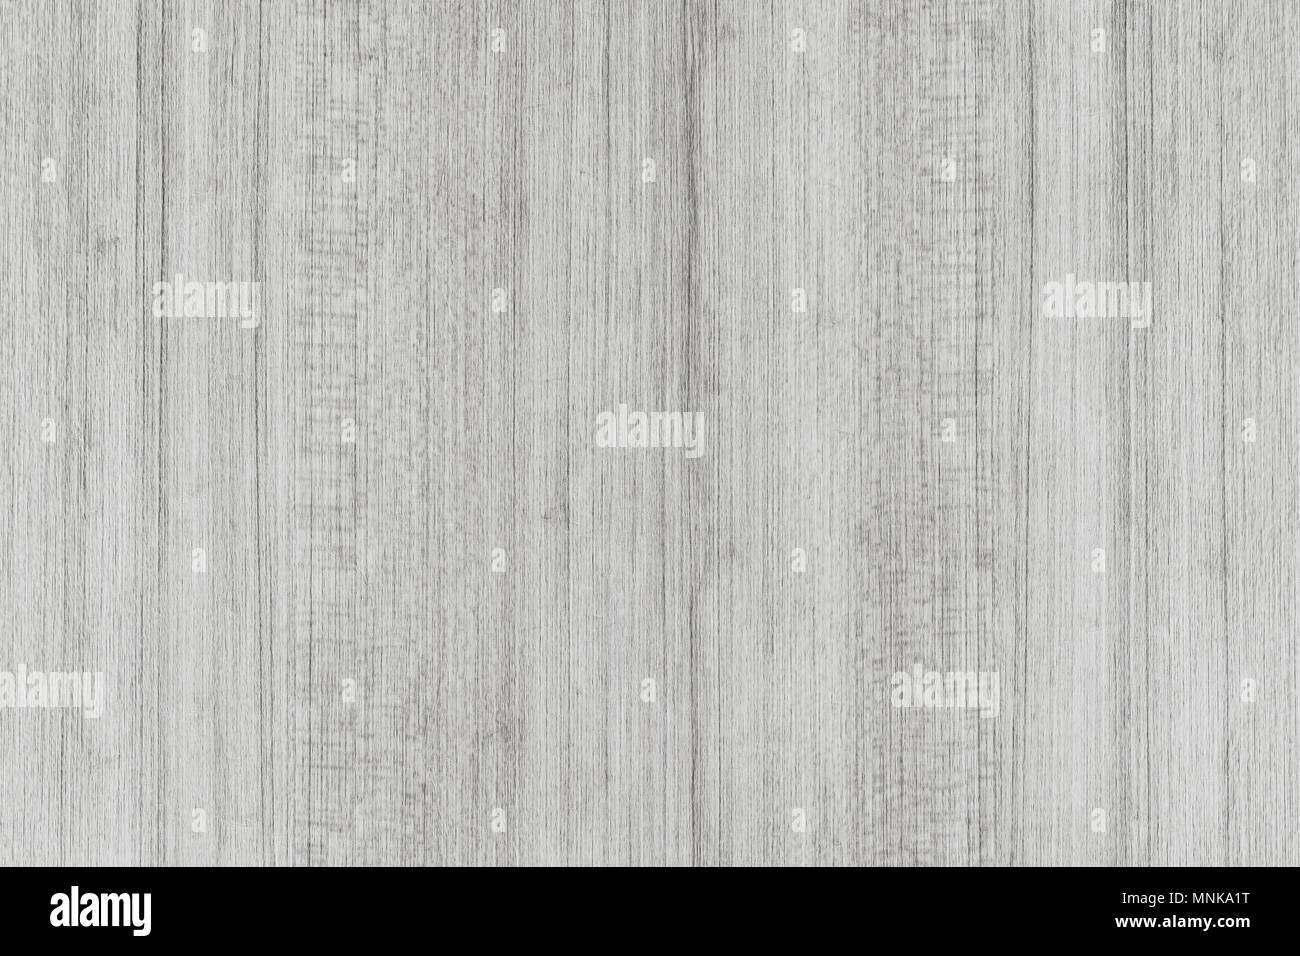 white washed grunge wooden texture to use as background, wood texture with natural pattern Stock Photo